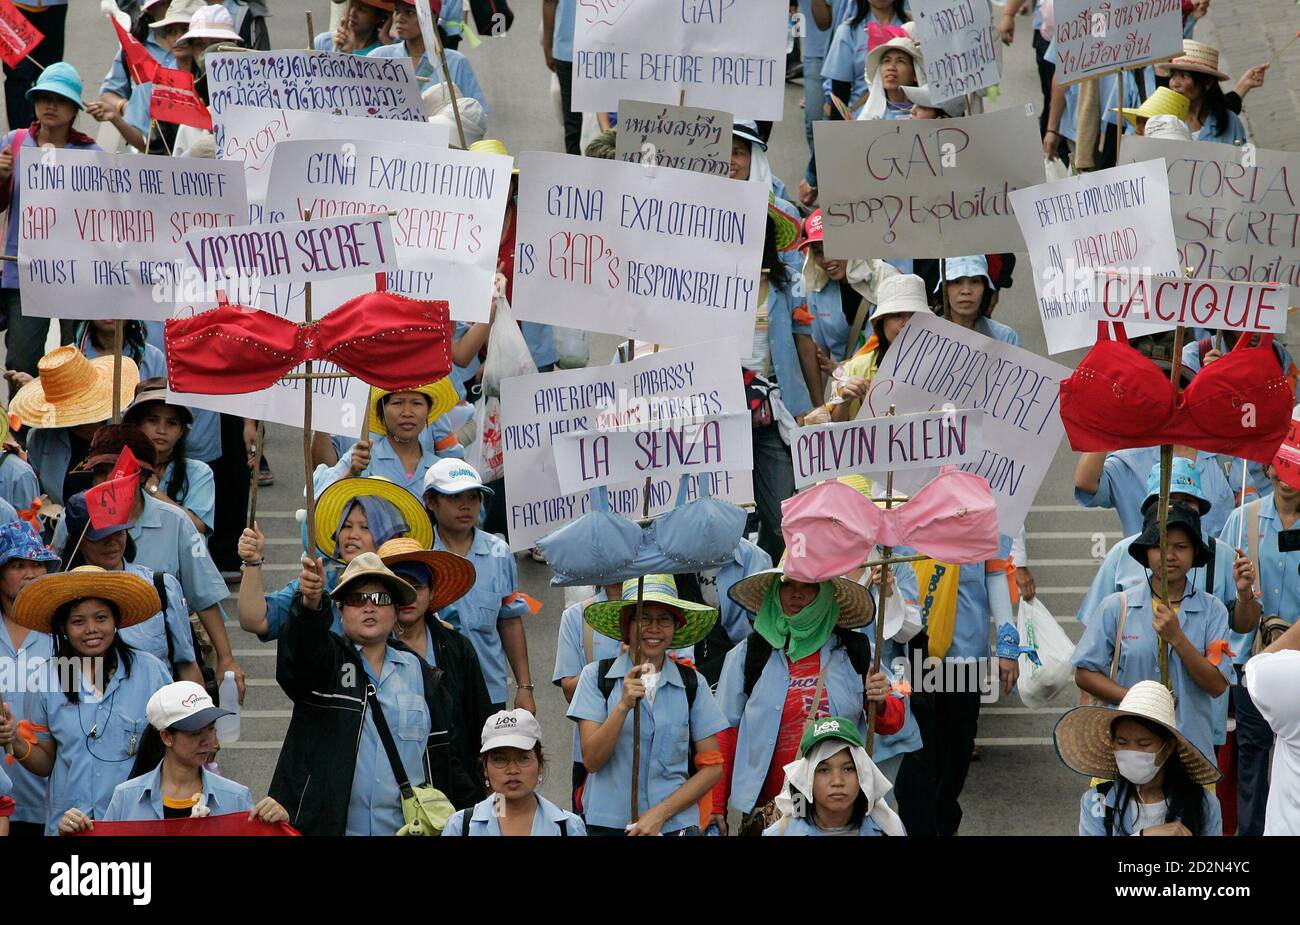 Thai demonstrators hold banners and bra during a protest outside the U.S.  embassy in Bangkok October 8, 2006. Some 800 workers submitted a letter to  the U.S. ambassador in which they urged